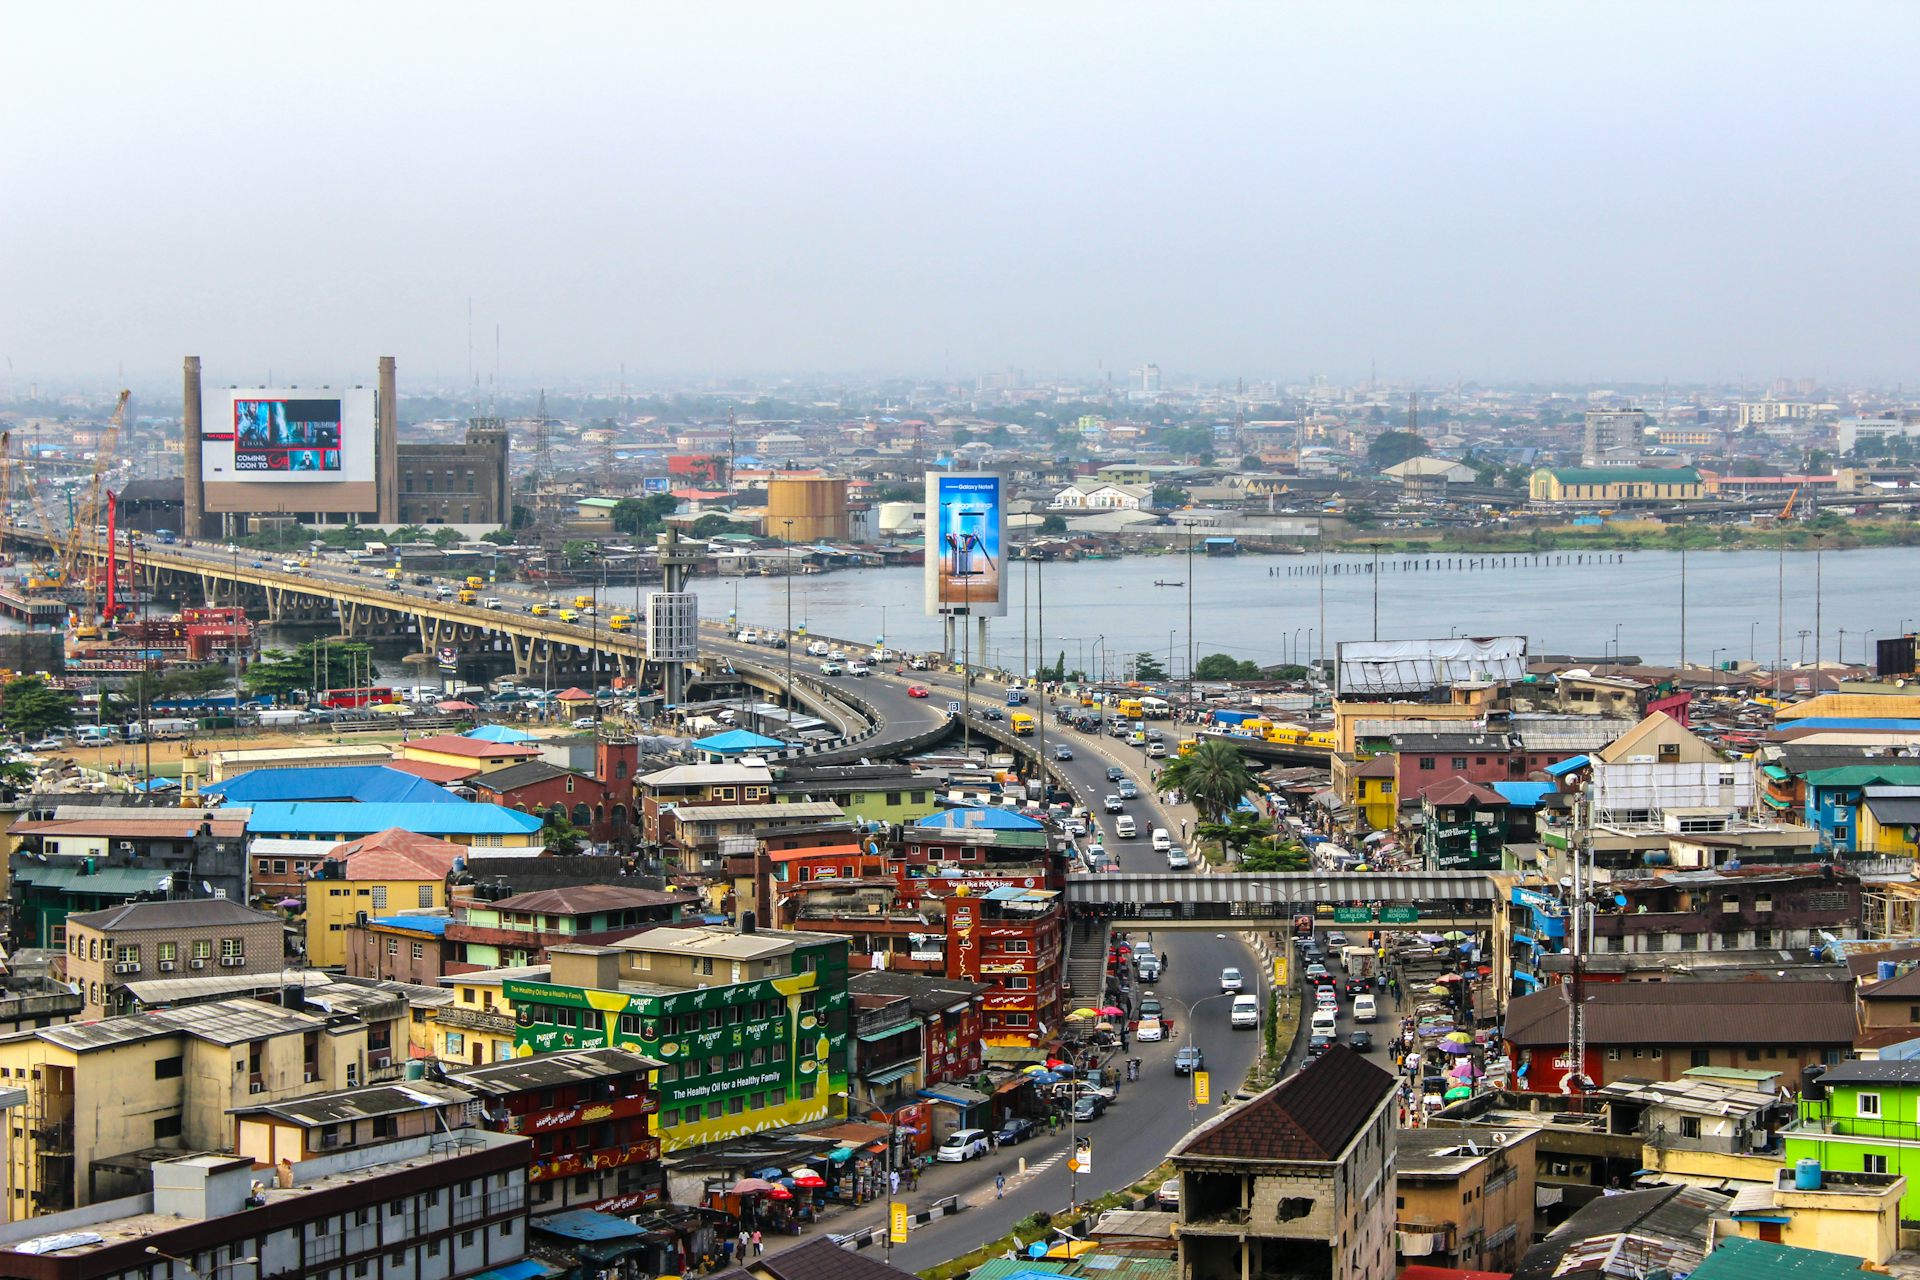 Lagos’s Chequered History: How It Came to Be the Megacity It Is Today